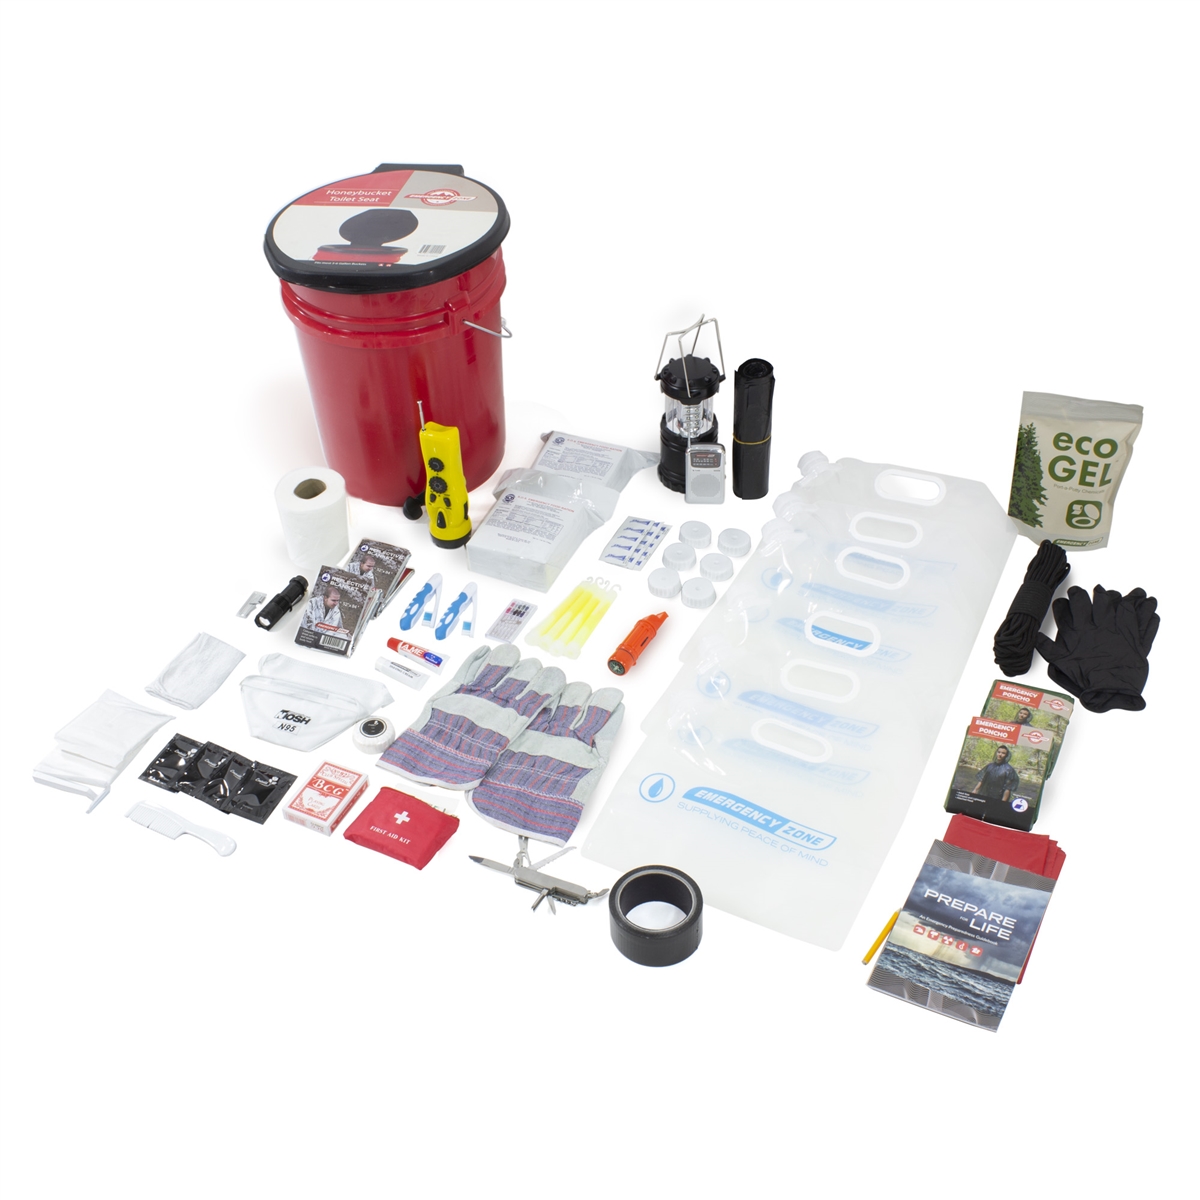 Emergency Zone 869-2 Complete Hurricane Survival Kit - 2 Person